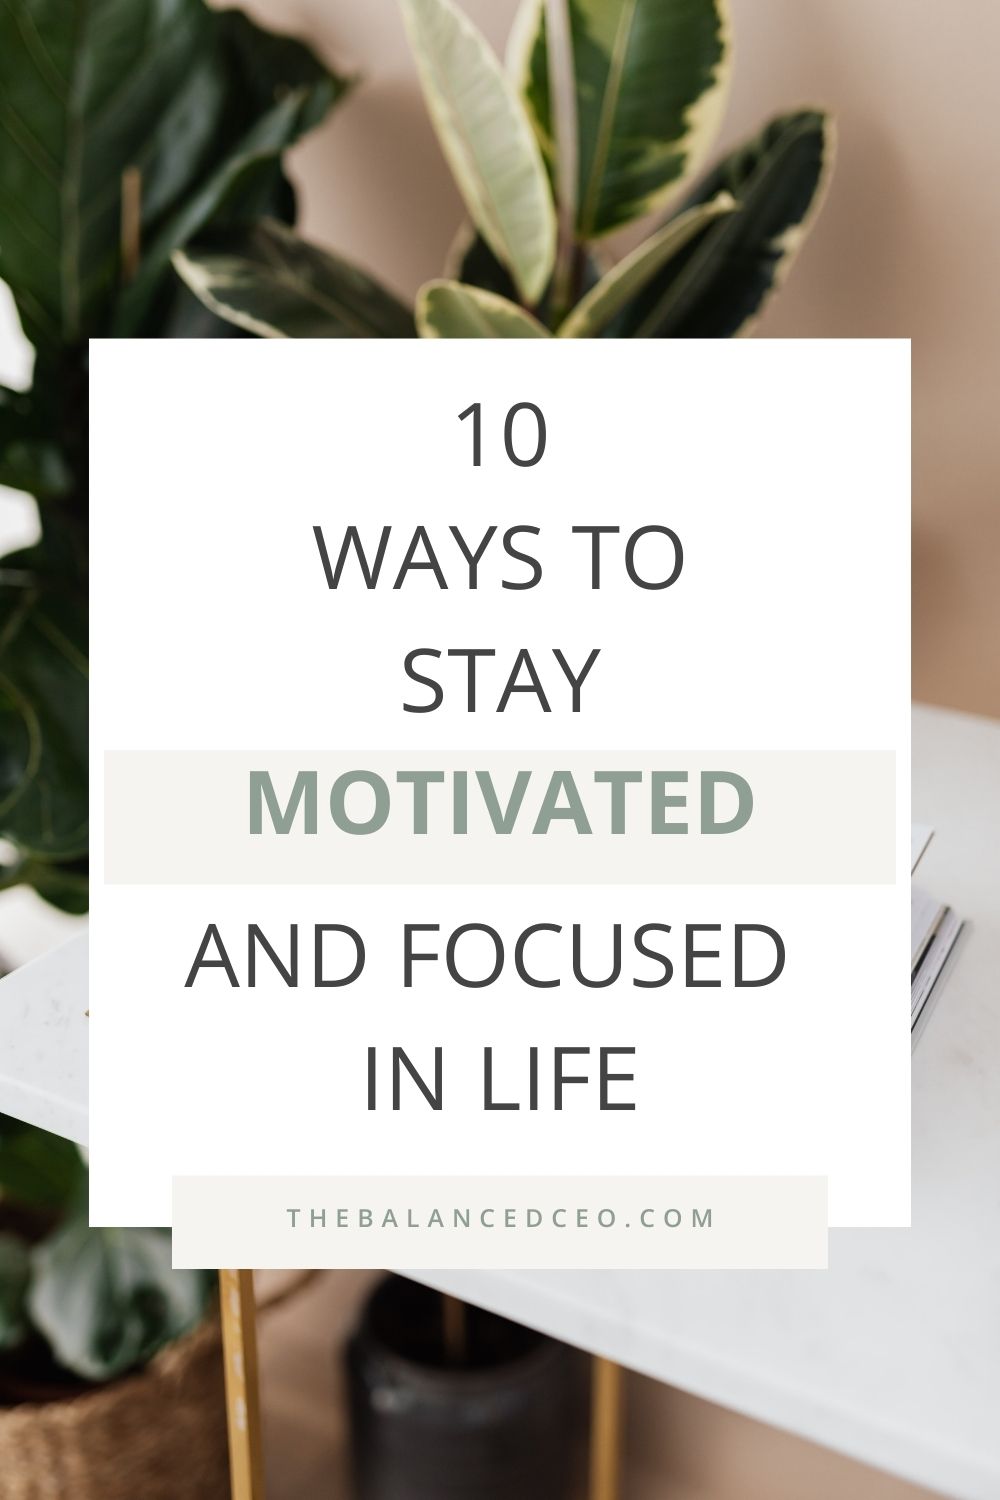 10 Ways to Stay Motivated and Focused in Life